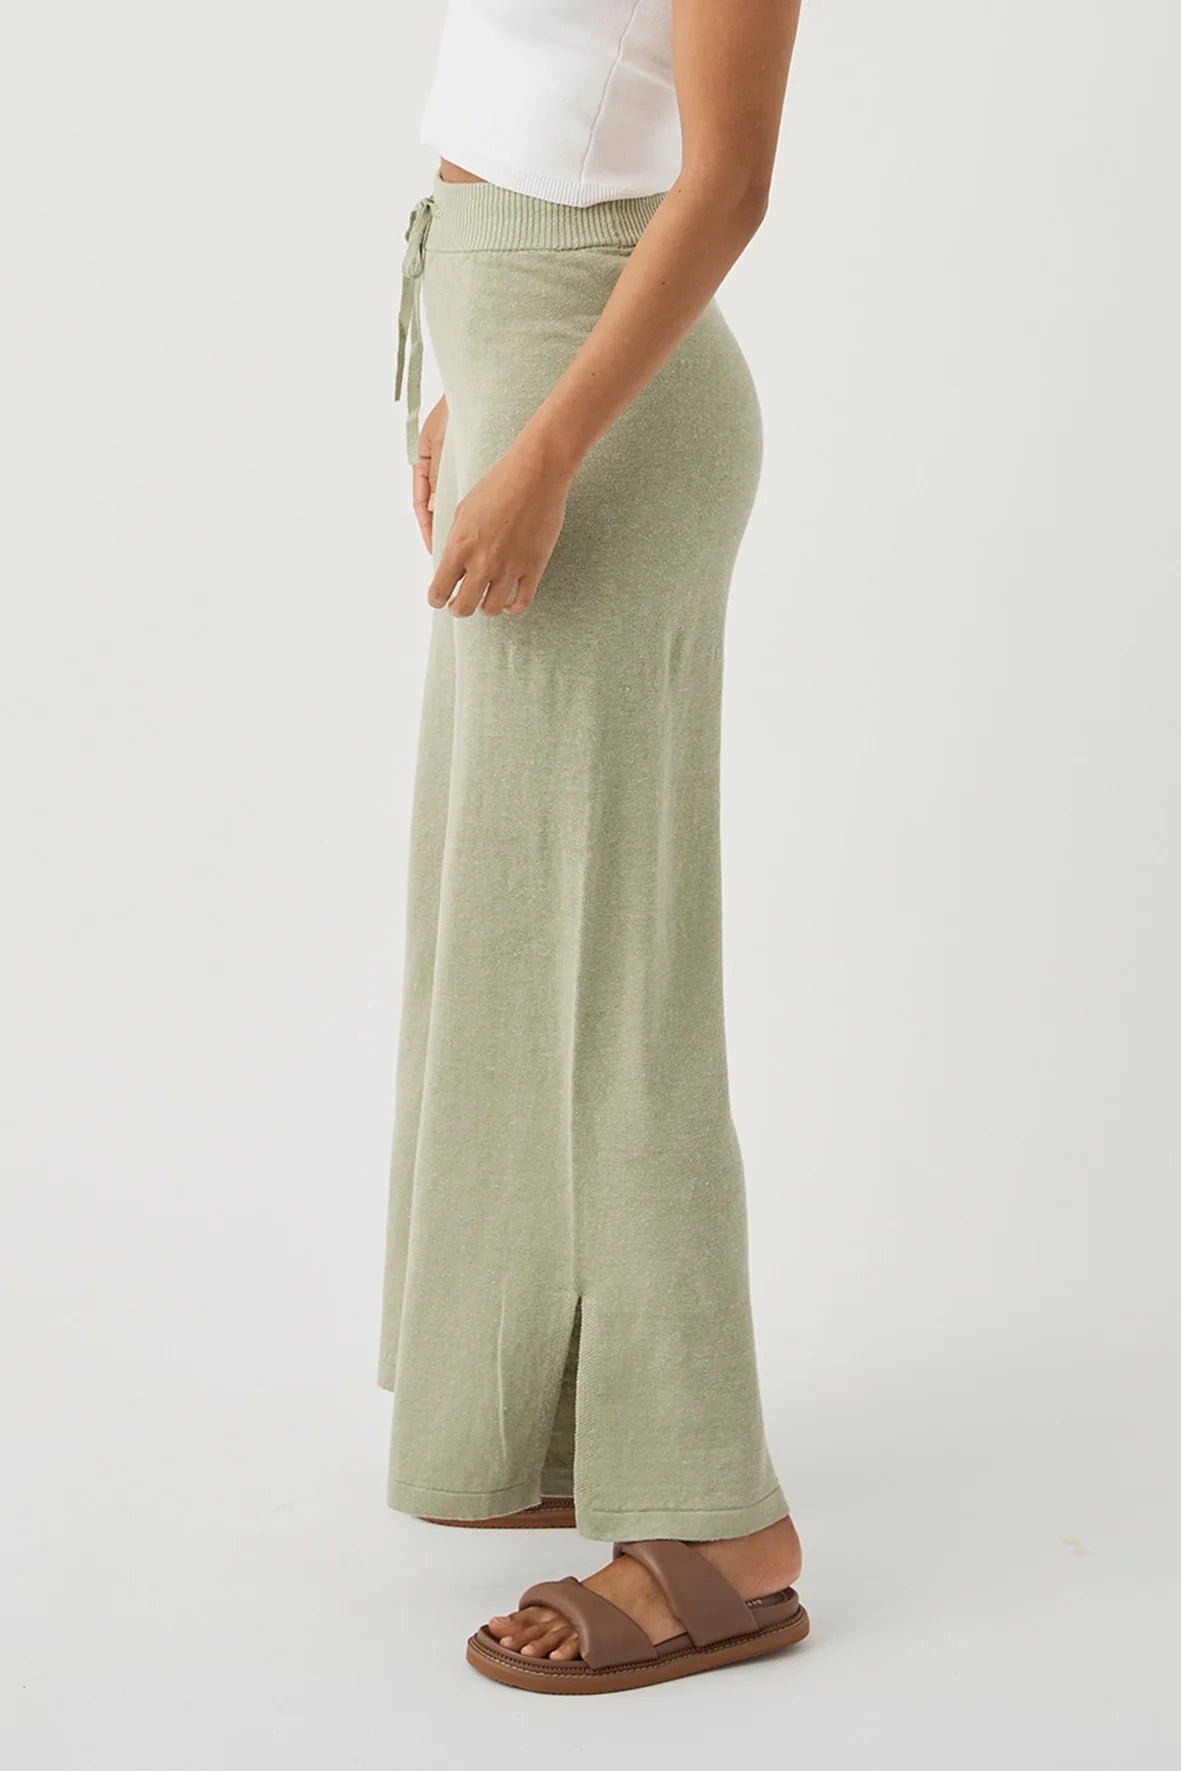 BRIE PANT ALOE - SUNDAY BEST TRADING CO